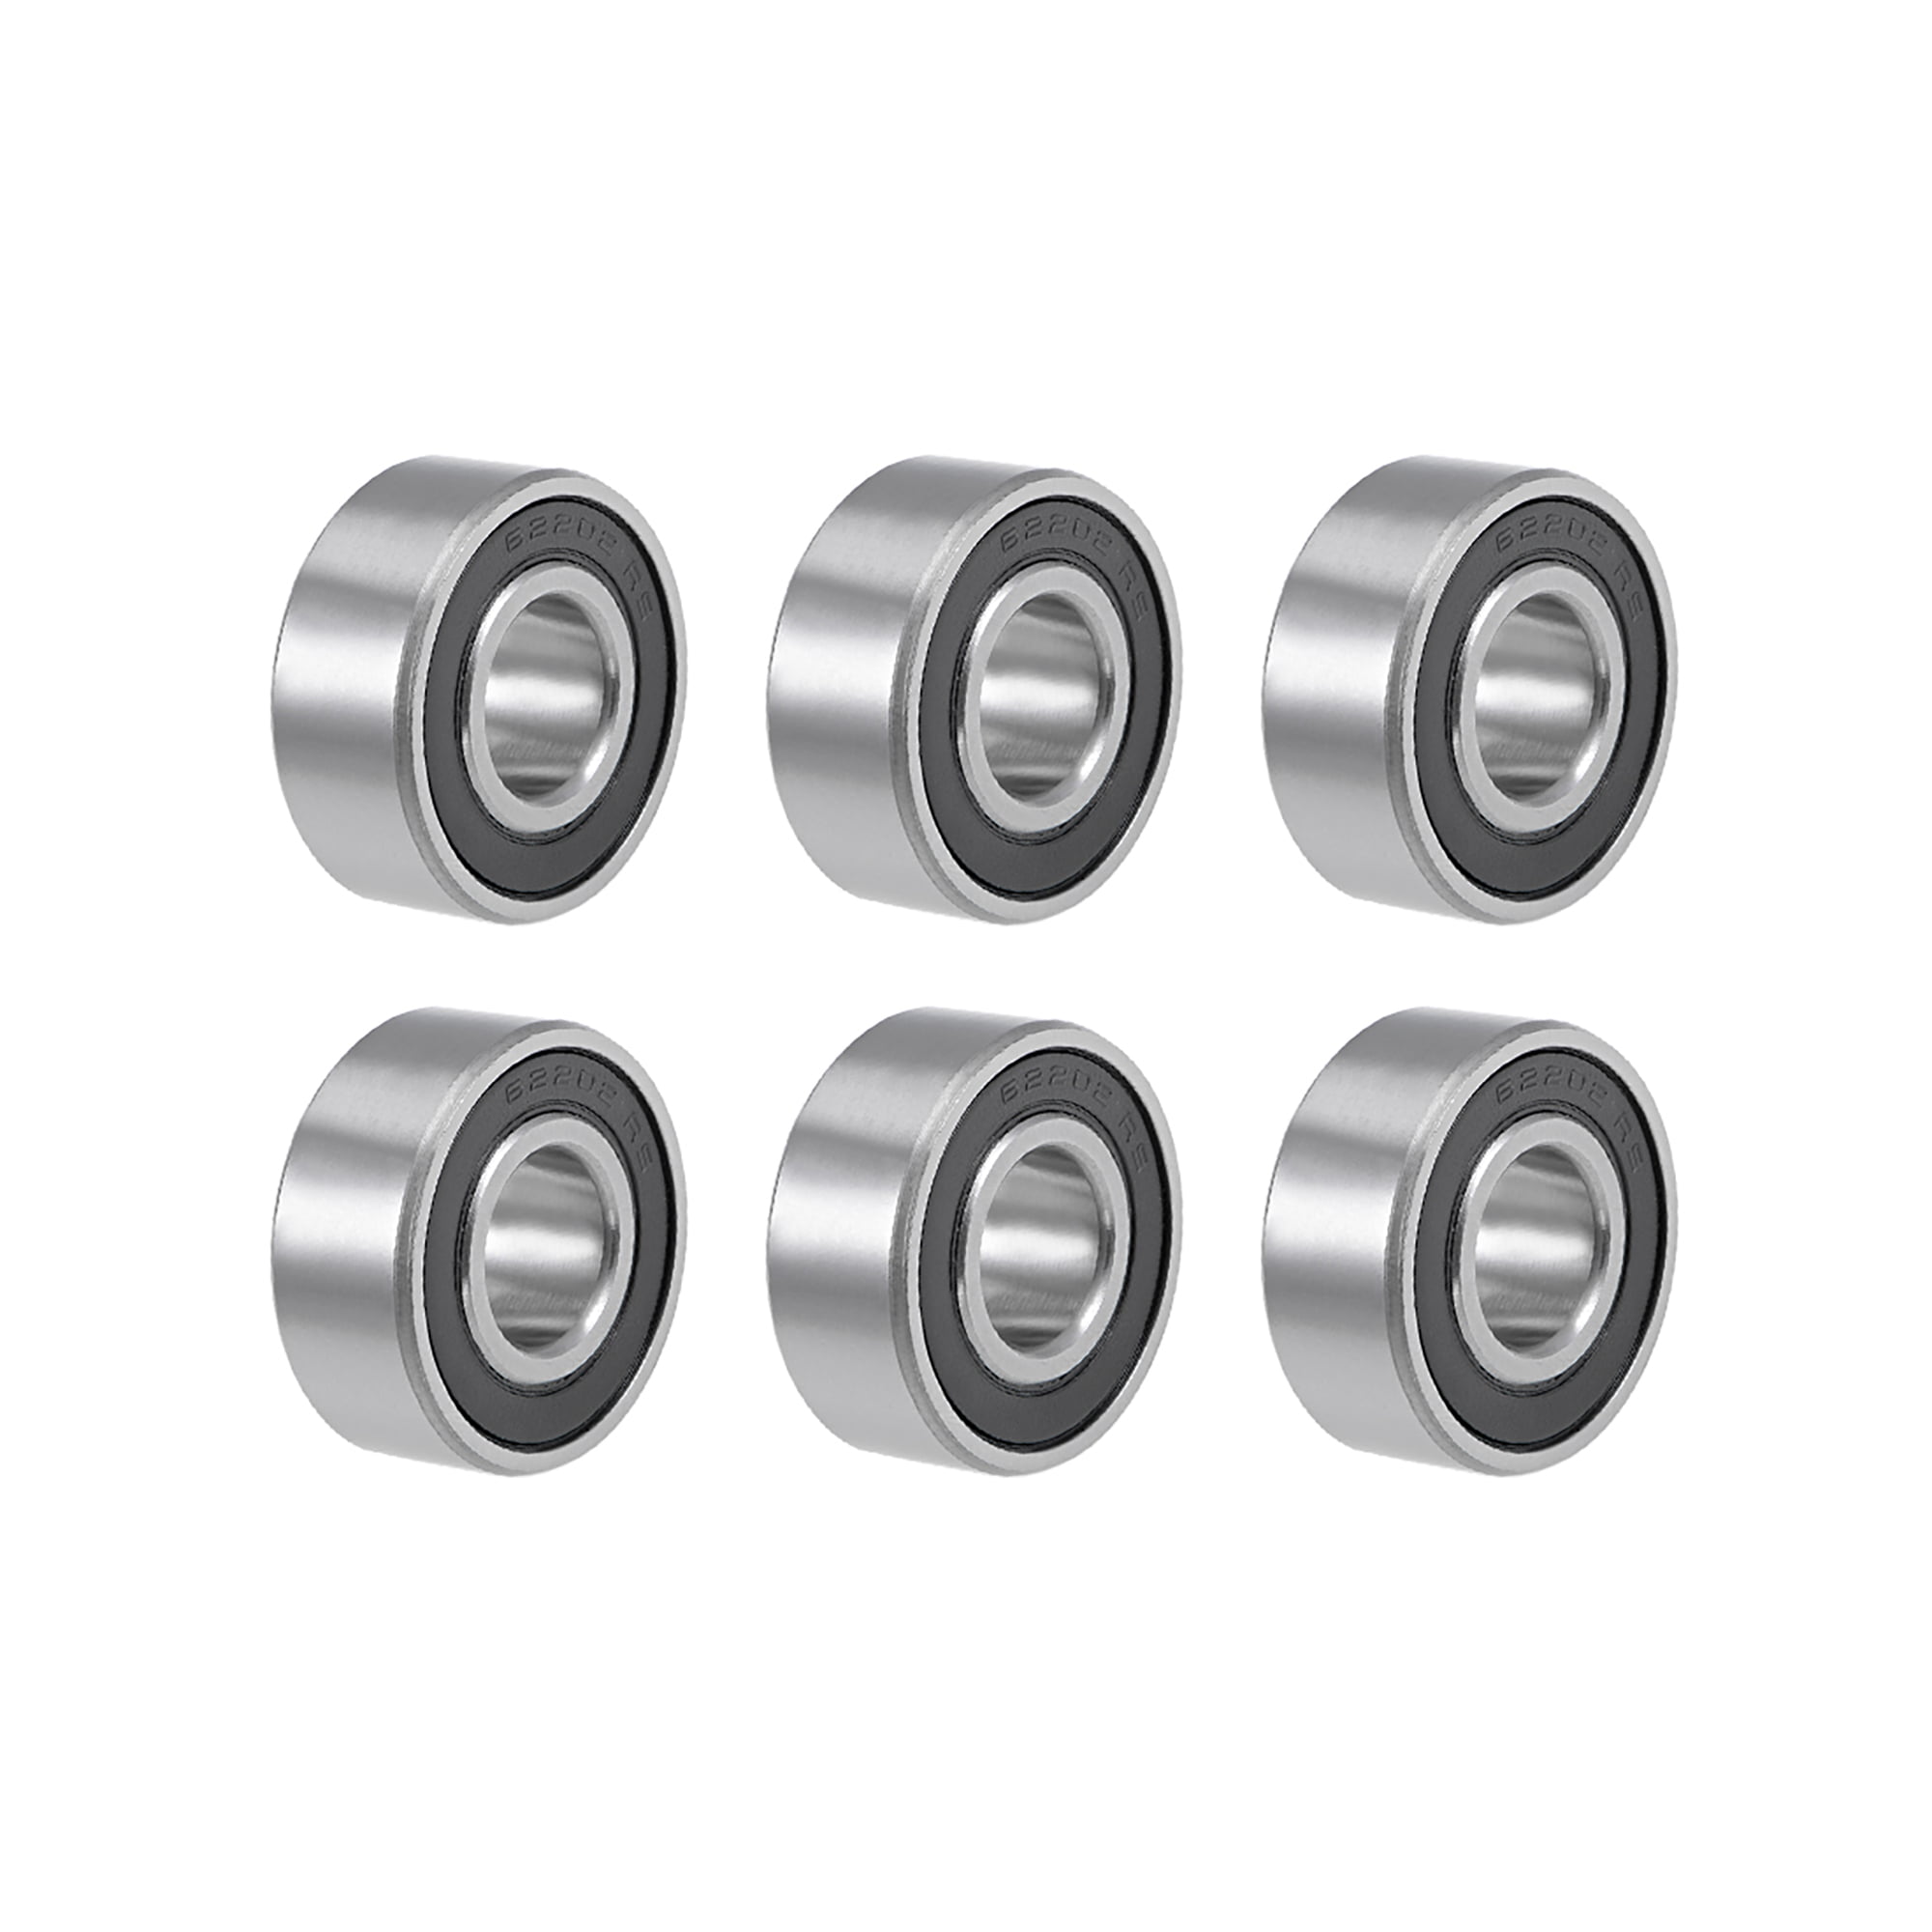 6 pcs 62202-2RS Deep Groove Ball Bearings high-Limit Speed 15mm x 35mm x 14mm Double Sealed Chrome Steel Z2 ABEC1 